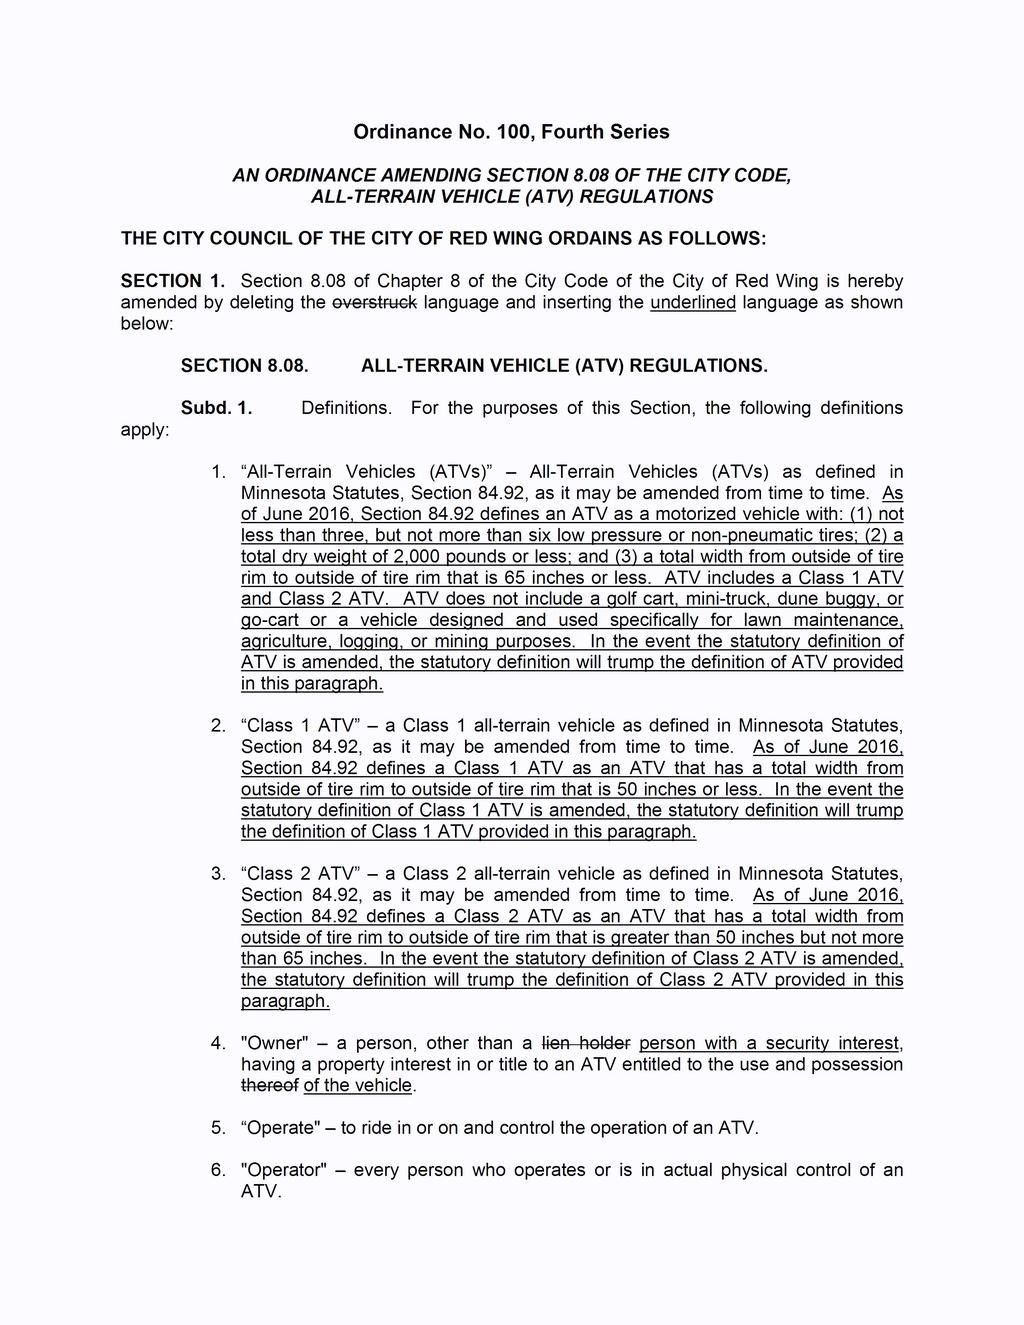 Ordinance No. 100, Fourth Series AN ORDINANCE AMENDING SECTION 8.